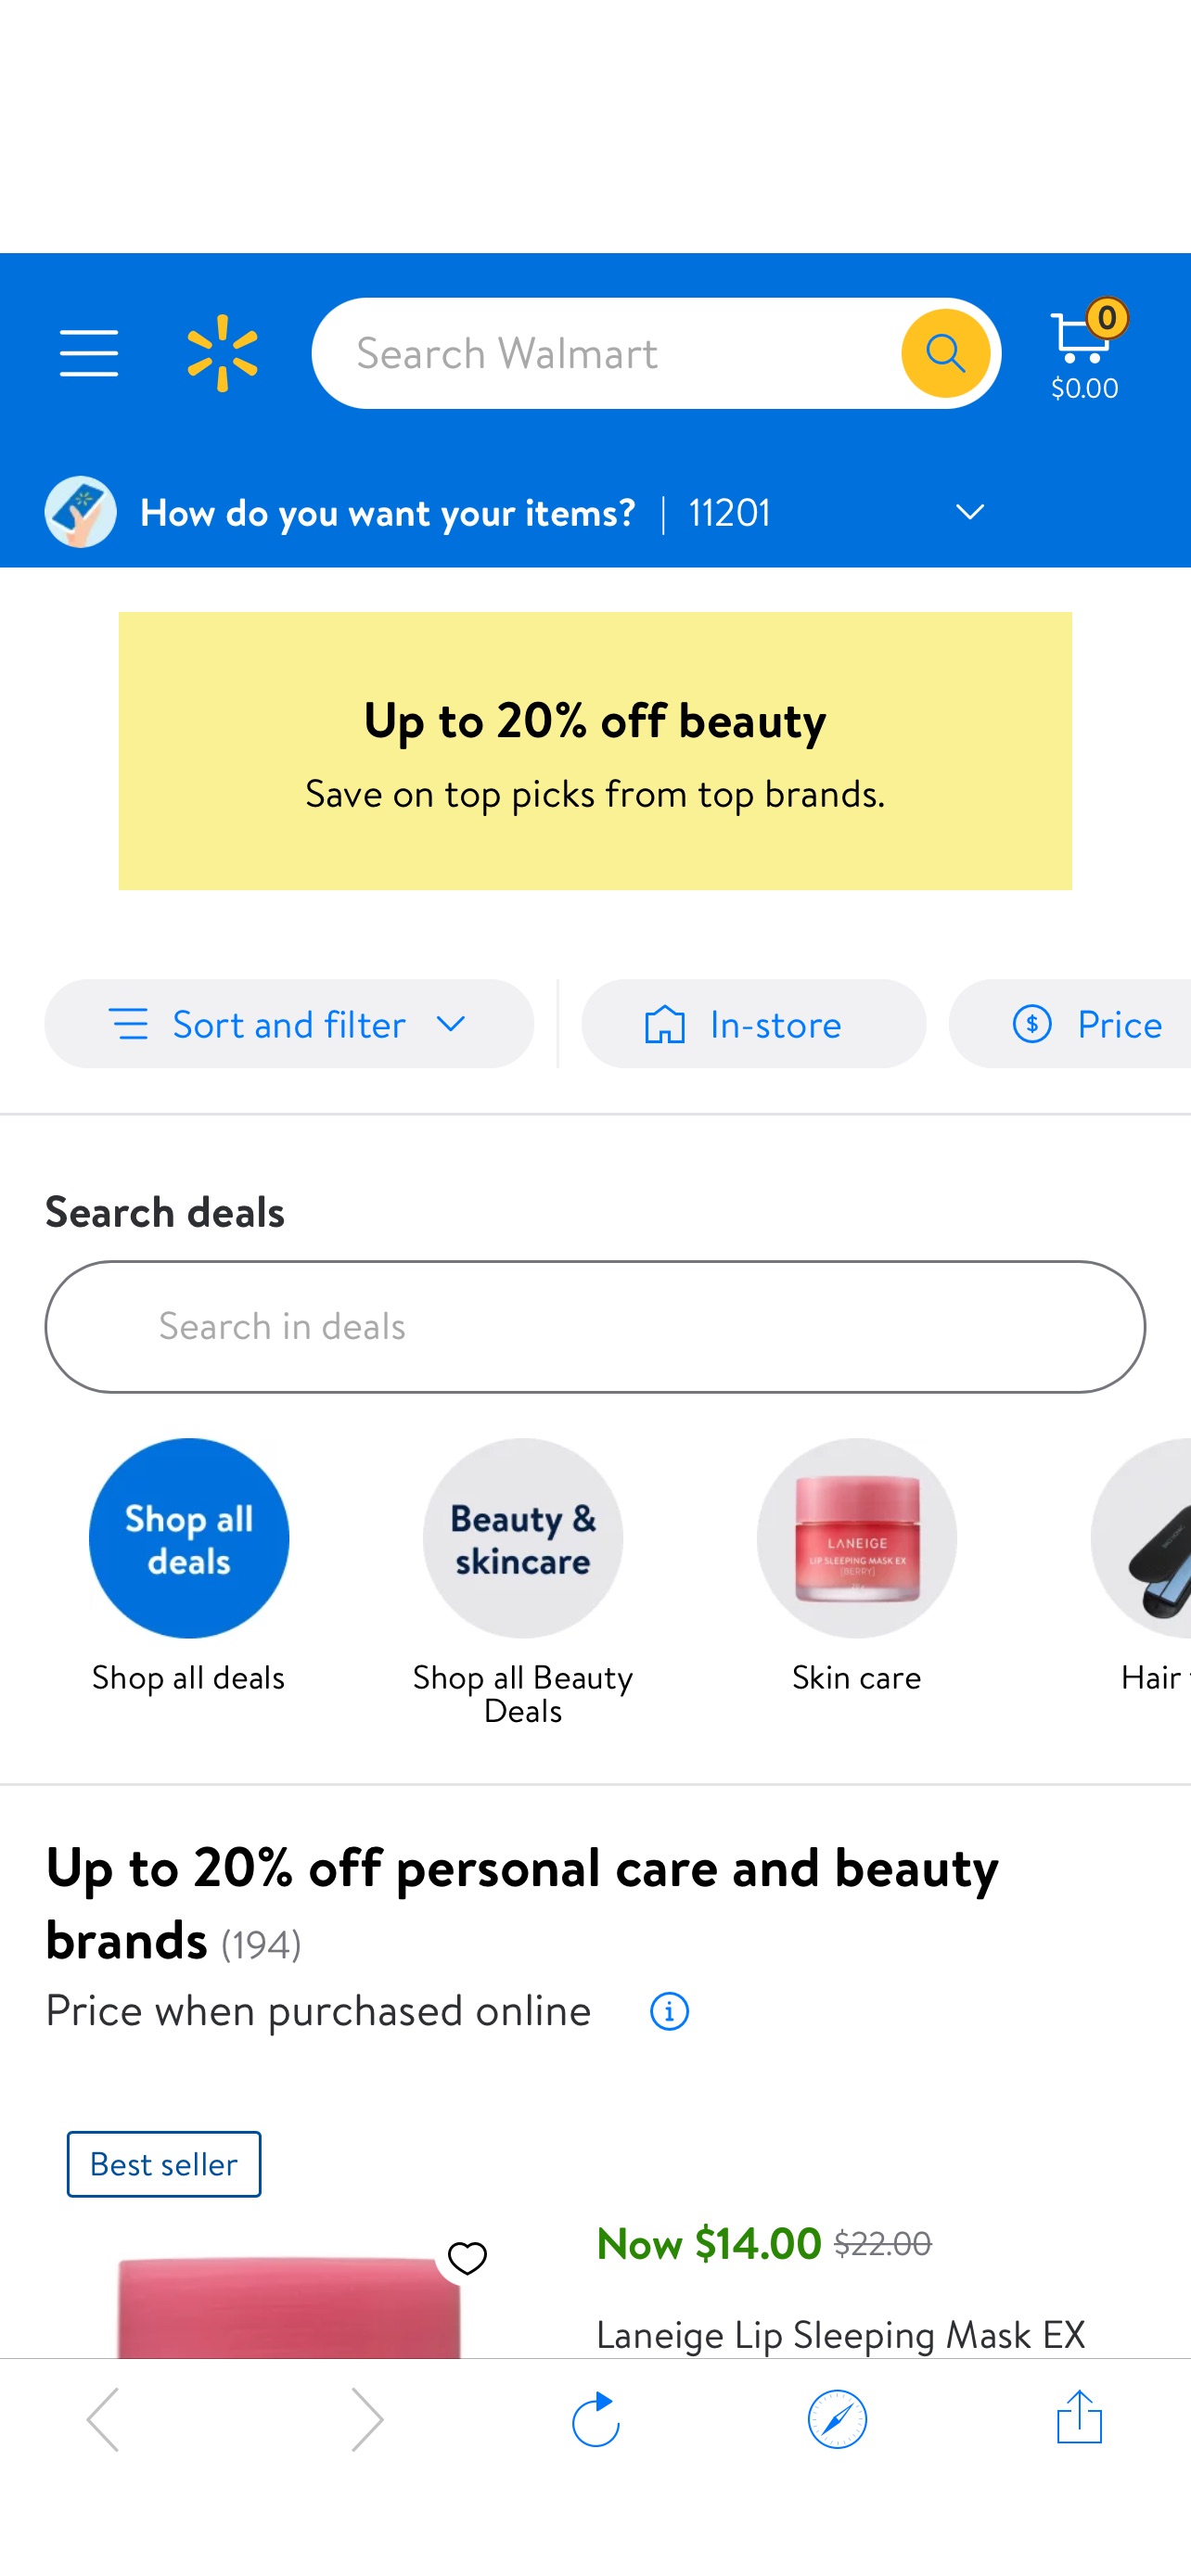 deals up to 20 percent off personal care and beauty brands - Walmart.com